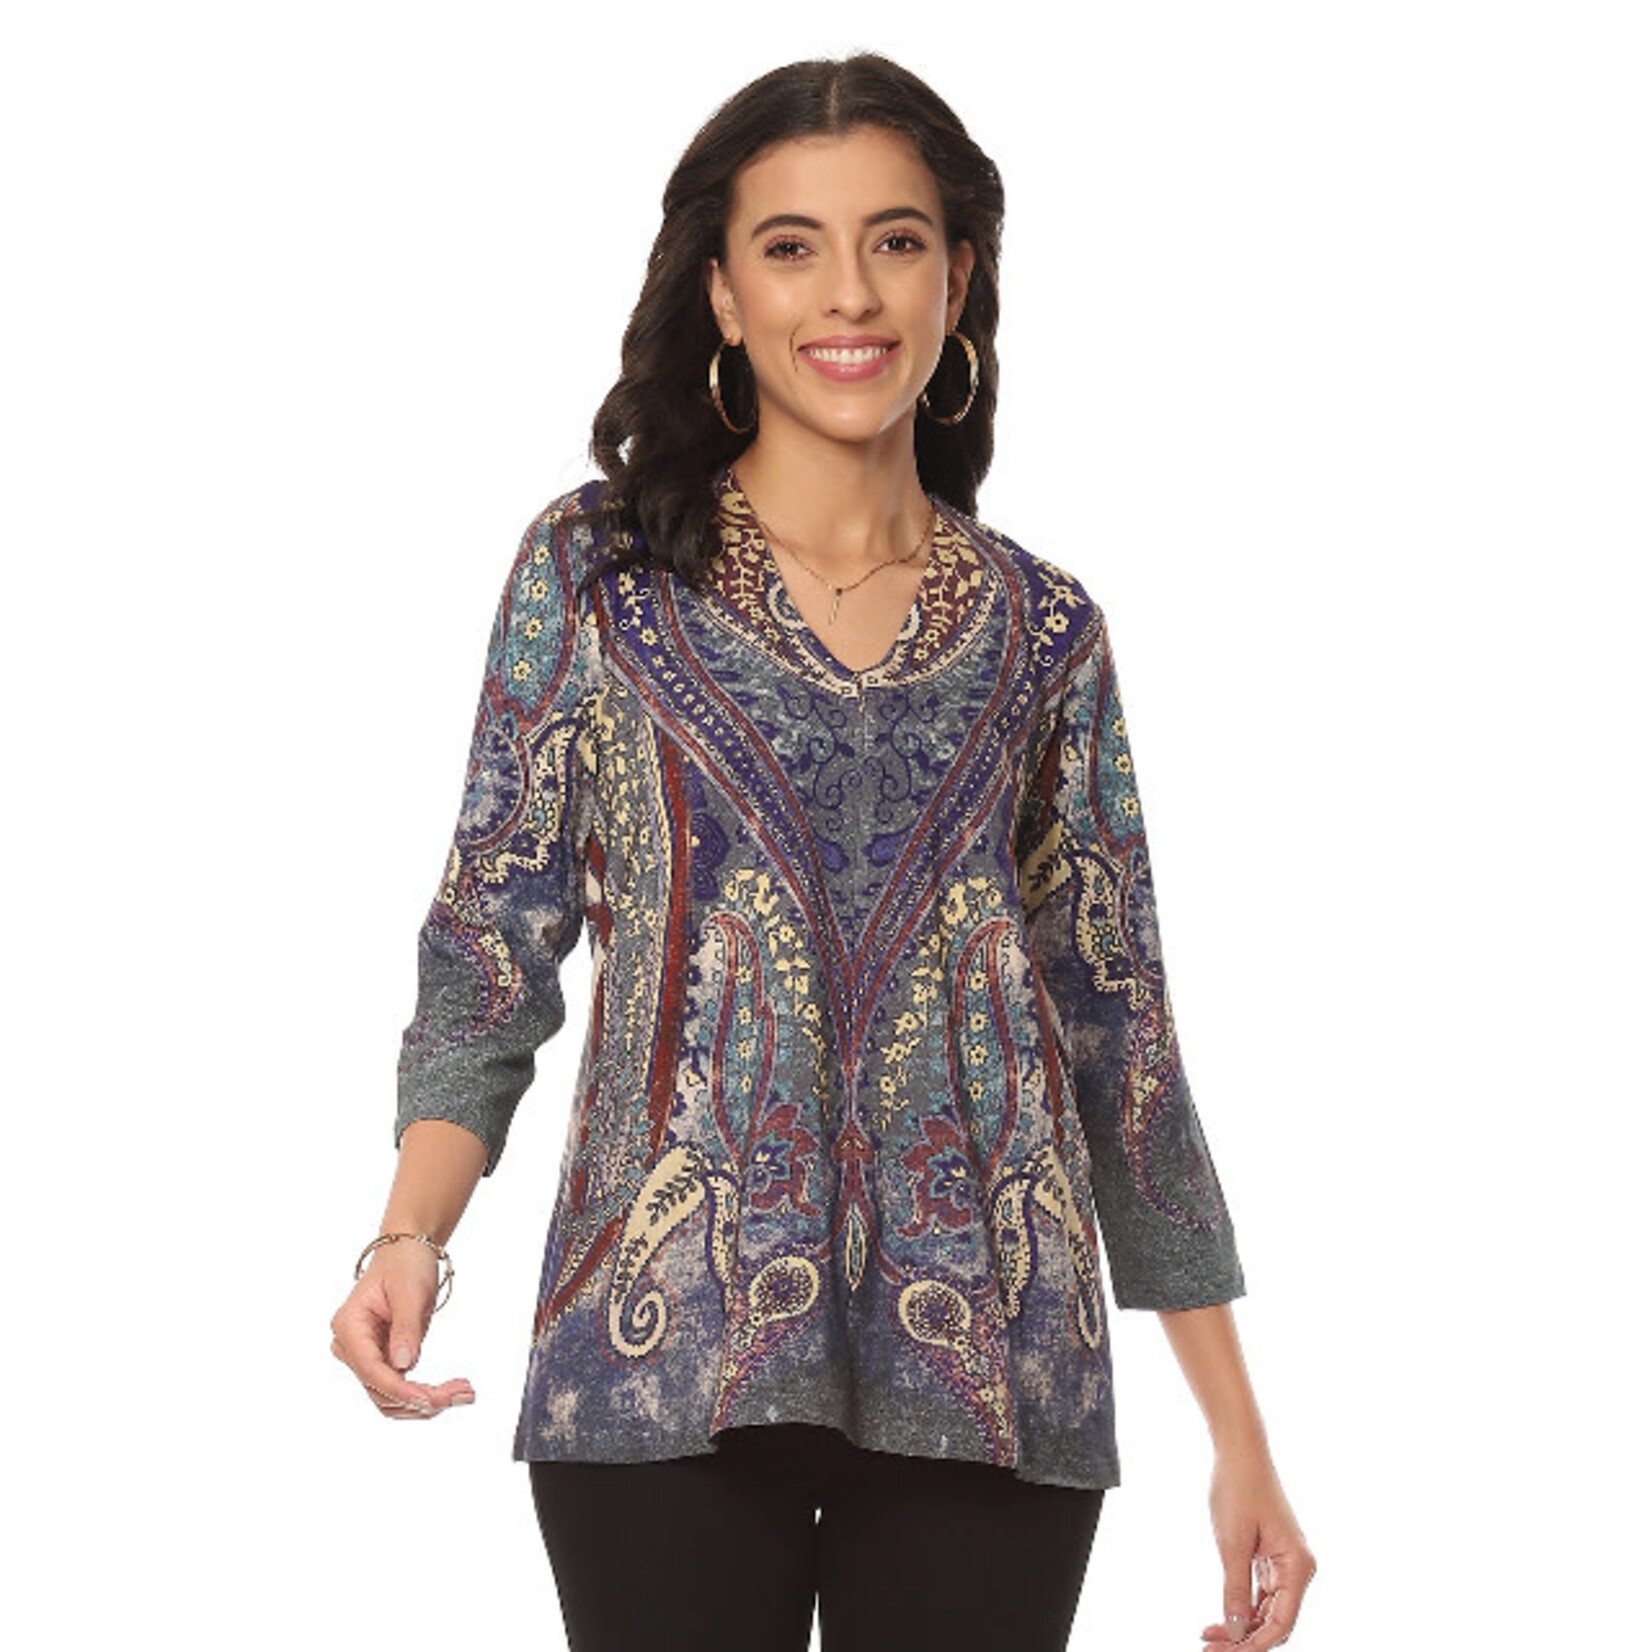 Parsley and Sage Multi Color Zoe Print 3/4 Sleeve Top